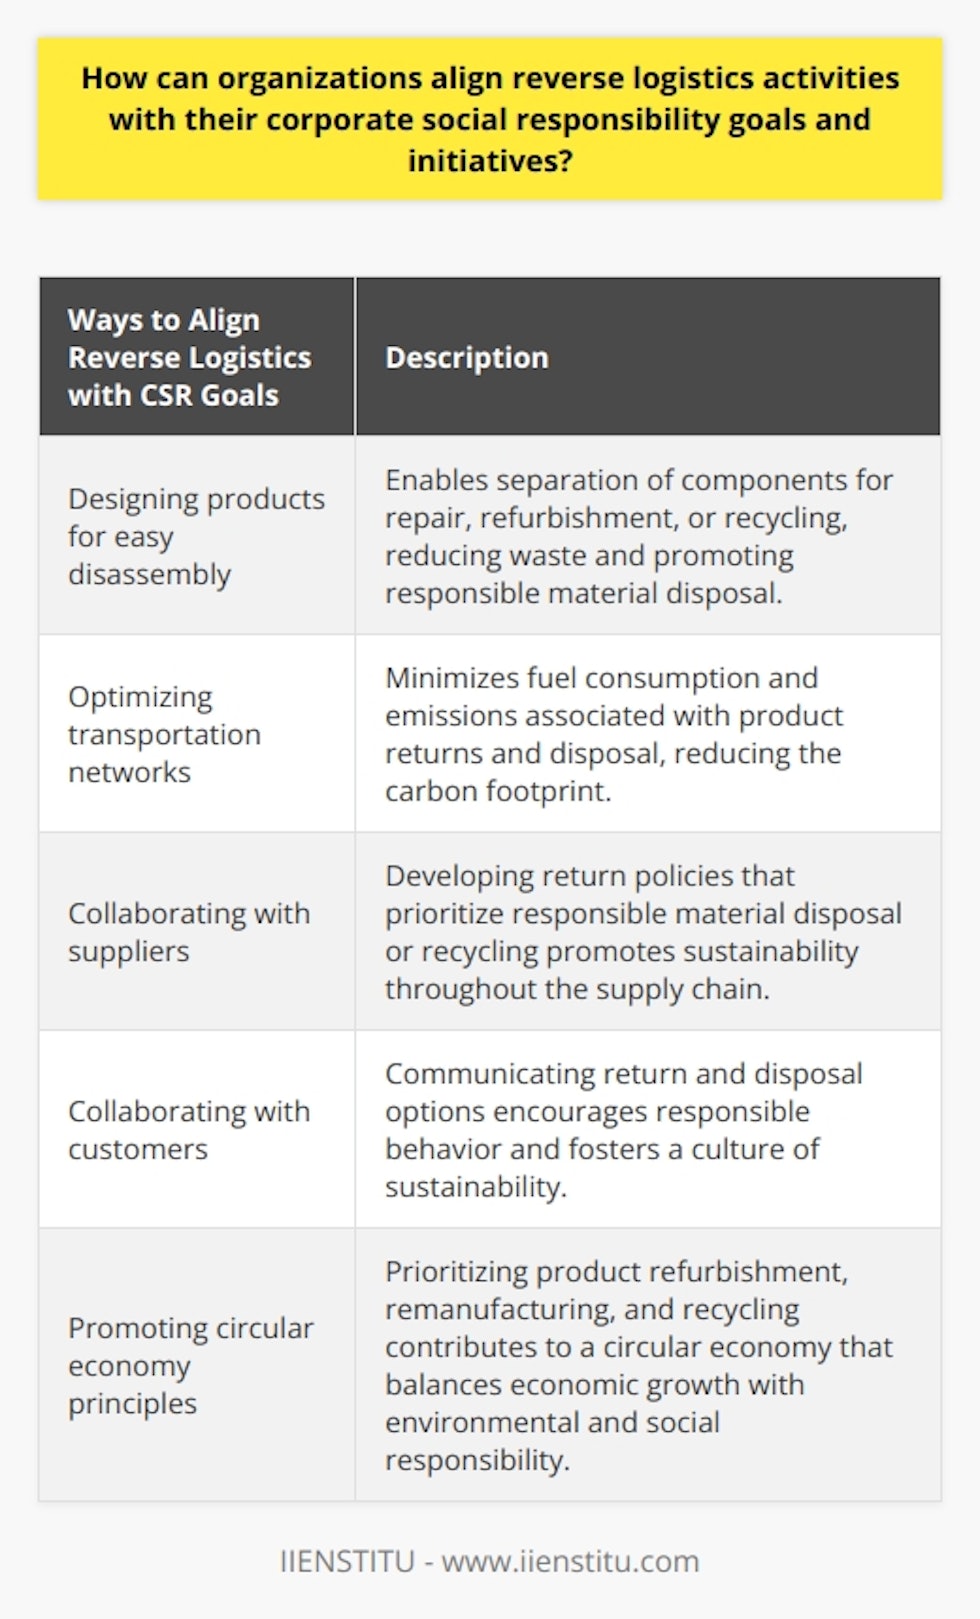 Reverse logistics activities, which focus on product return, reuse, and disposal, can be aligned with an organization's corporate social responsibility (CSR) goals and initiatives by incorporating environmental, social, and governance considerations into their supply chain operations. This alignment allows companies to enhance their sustainability profile, create value for stakeholders, and minimize waste and environmental impacts.To align reverse logistics with CSR goals, organizations can implement processes that facilitate the efficient return, reuse, or recycling of products and materials. Designing products for easy disassembly, for example, enables the separation of components for repair, refurbishment, or recycling. This approach reduces waste and promotes responsible material disposal. Furthermore, optimizing transportation networks can minimize fuel consumption and emissions associated with product returns and disposal, thus reducing the carbon footprint of operations.Collaboration with suppliers and customers is another crucial aspect of incorporating CSR into reverse logistics. Working with suppliers to develop return policies that prioritize responsible material disposal or recycling can promote sustainability throughout the supply chain. Communicating with customers about return and disposal options encourages responsible behavior and fosters a culture of sustainability. Involving all stakeholders in the reverse logistics process drives positive environmental and social outcomes.Additionally, aligning reverse logistics with CSR initiatives supports the transition to a circular economy. This economic model aims to keep resources in use for as long as possible and minimize waste. By prioritizing product refurbishment, remanufacturing, and recycling, organizations contribute to a circular economy that balances economic growth with environmental and social responsibility. Embracing circular economy principles can enhance a company's reputation, brand value, and stakeholder relationships, while also providing tangible benefits to the environment and society.In conclusion, integrating environmental, social, and governance considerations into reverse logistics activities allows organizations to align their operations with CSR goals. By reducing waste, minimizing environmental impacts, and promoting responsible consumption, companies strengthen their sustainability profile, brand value, and relationships with stakeholders. The alignment of reverse logistics with CSR ultimately benefits not only the organization but also the environment and society as a whole.